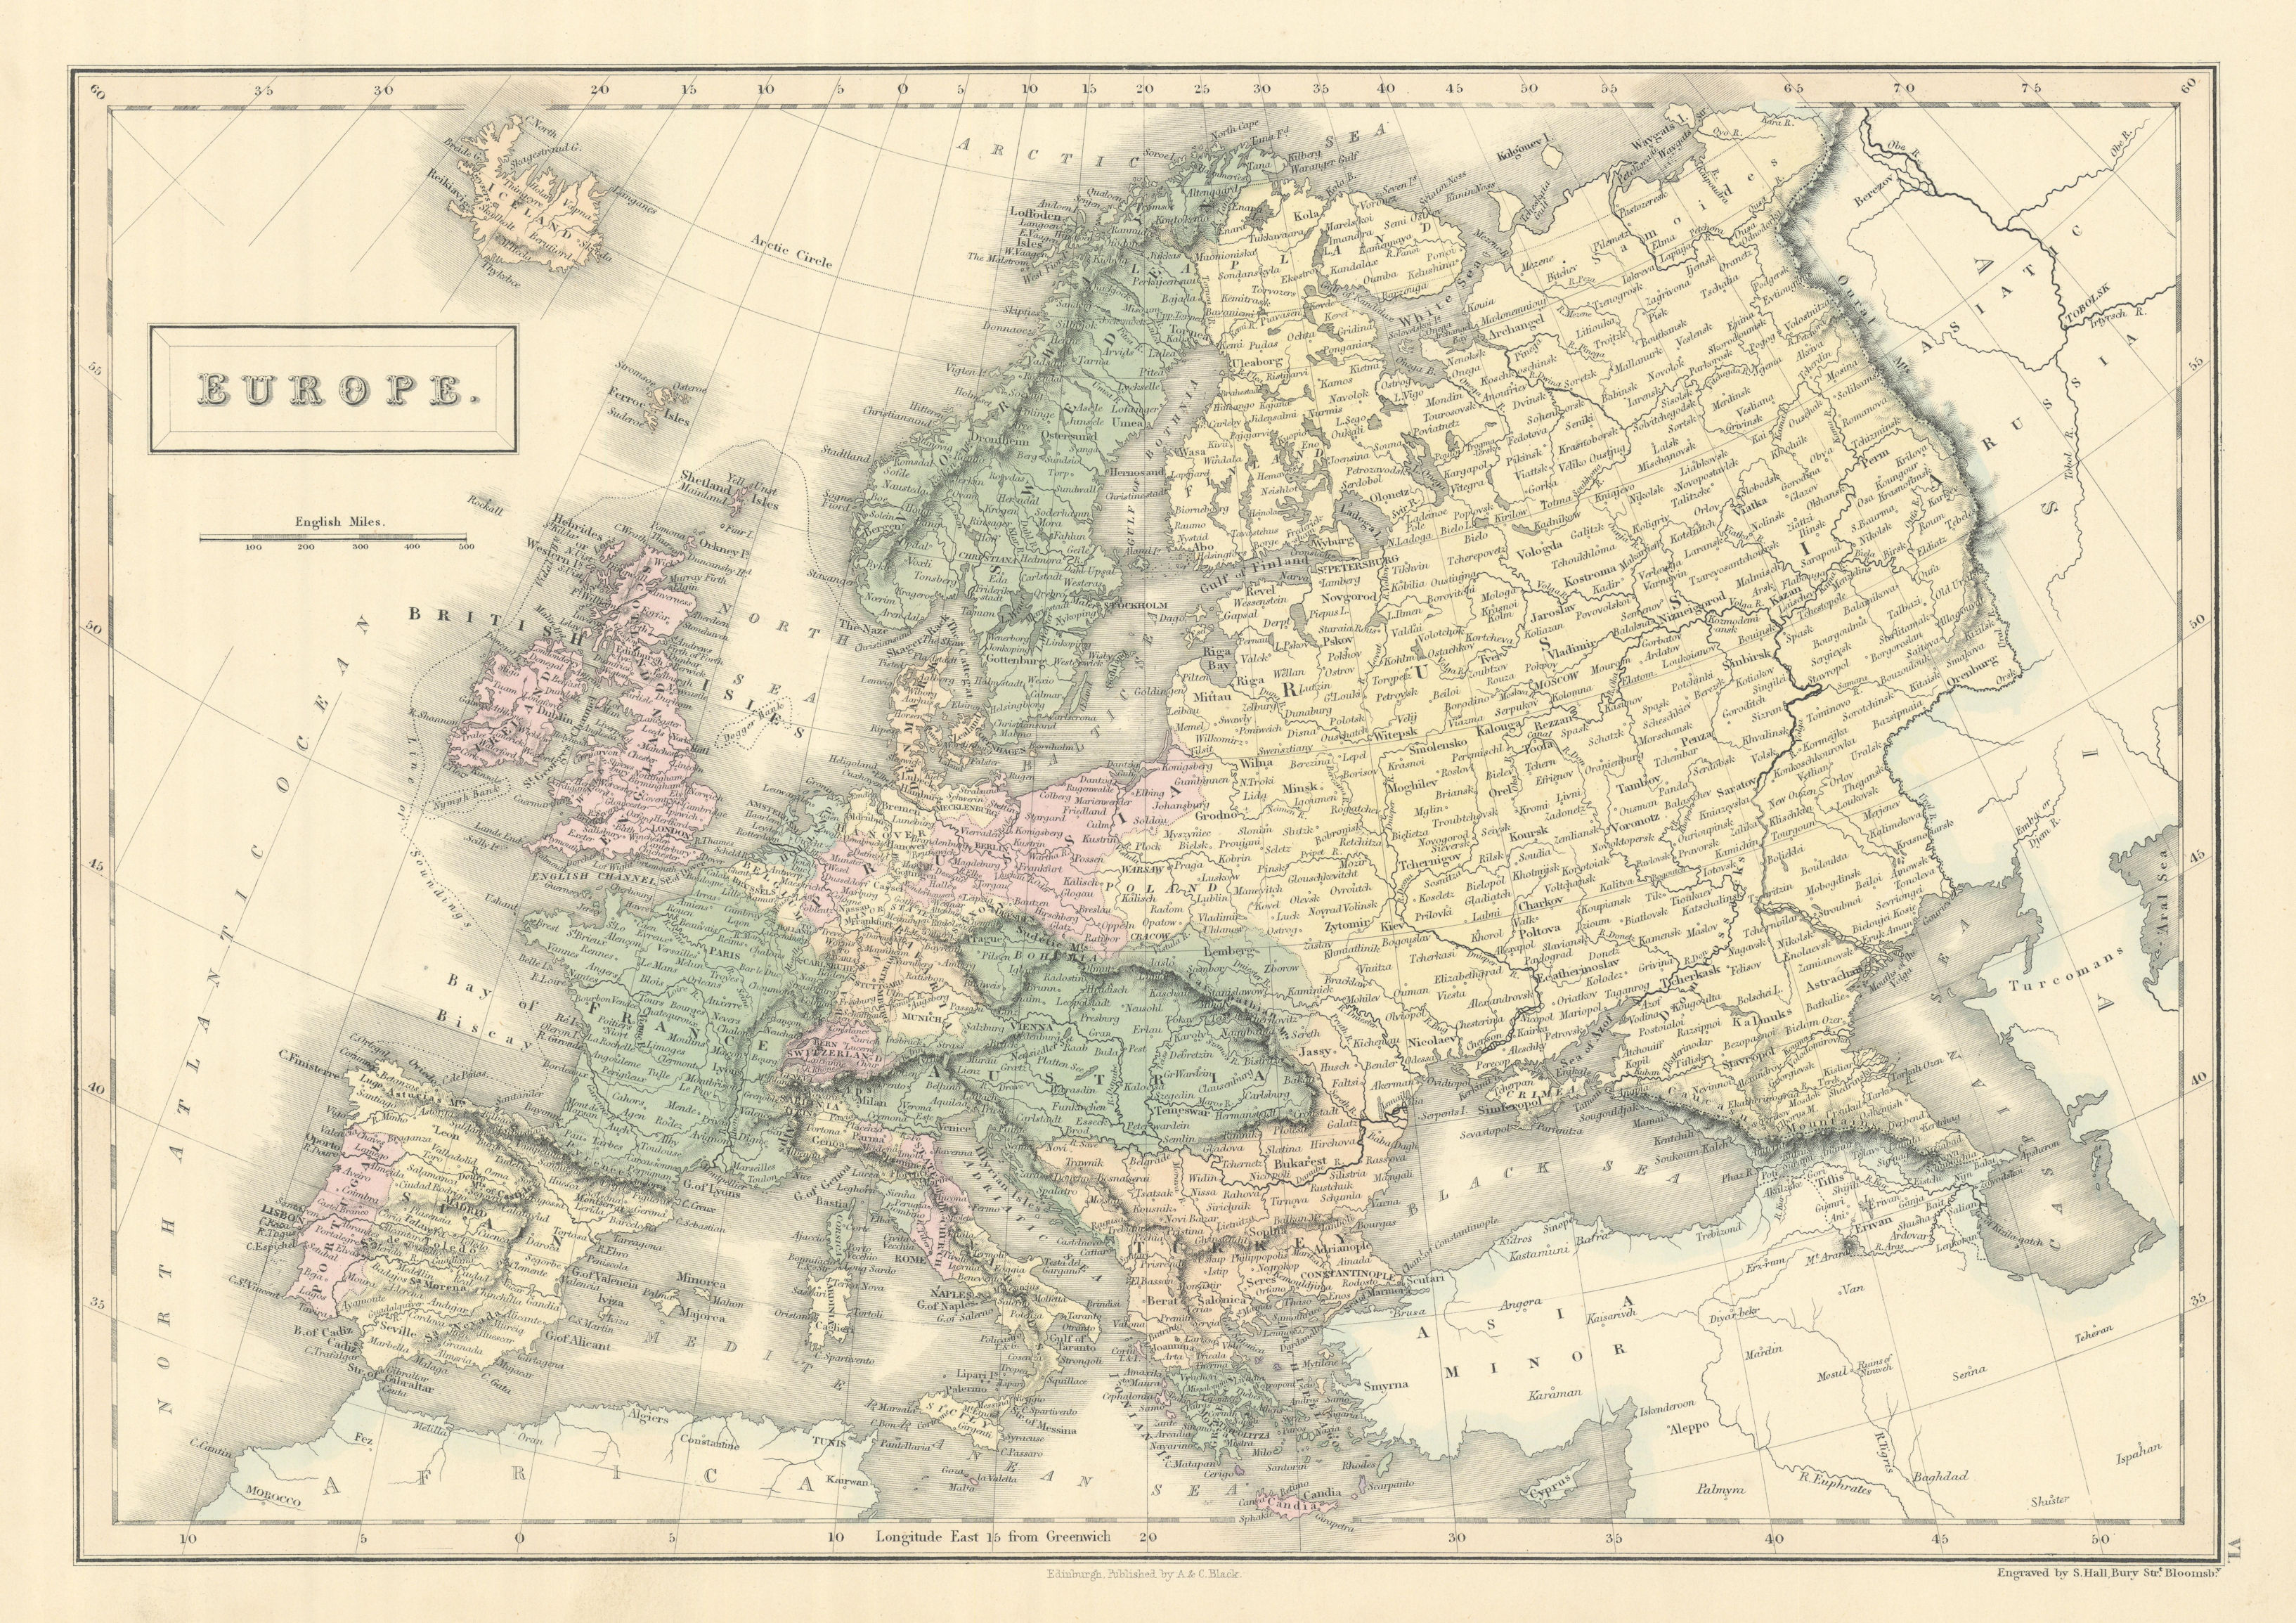 Associate Product Europe by SIDNEY HALL. Prussia Austria Turkey in Europe &c 1854 old map